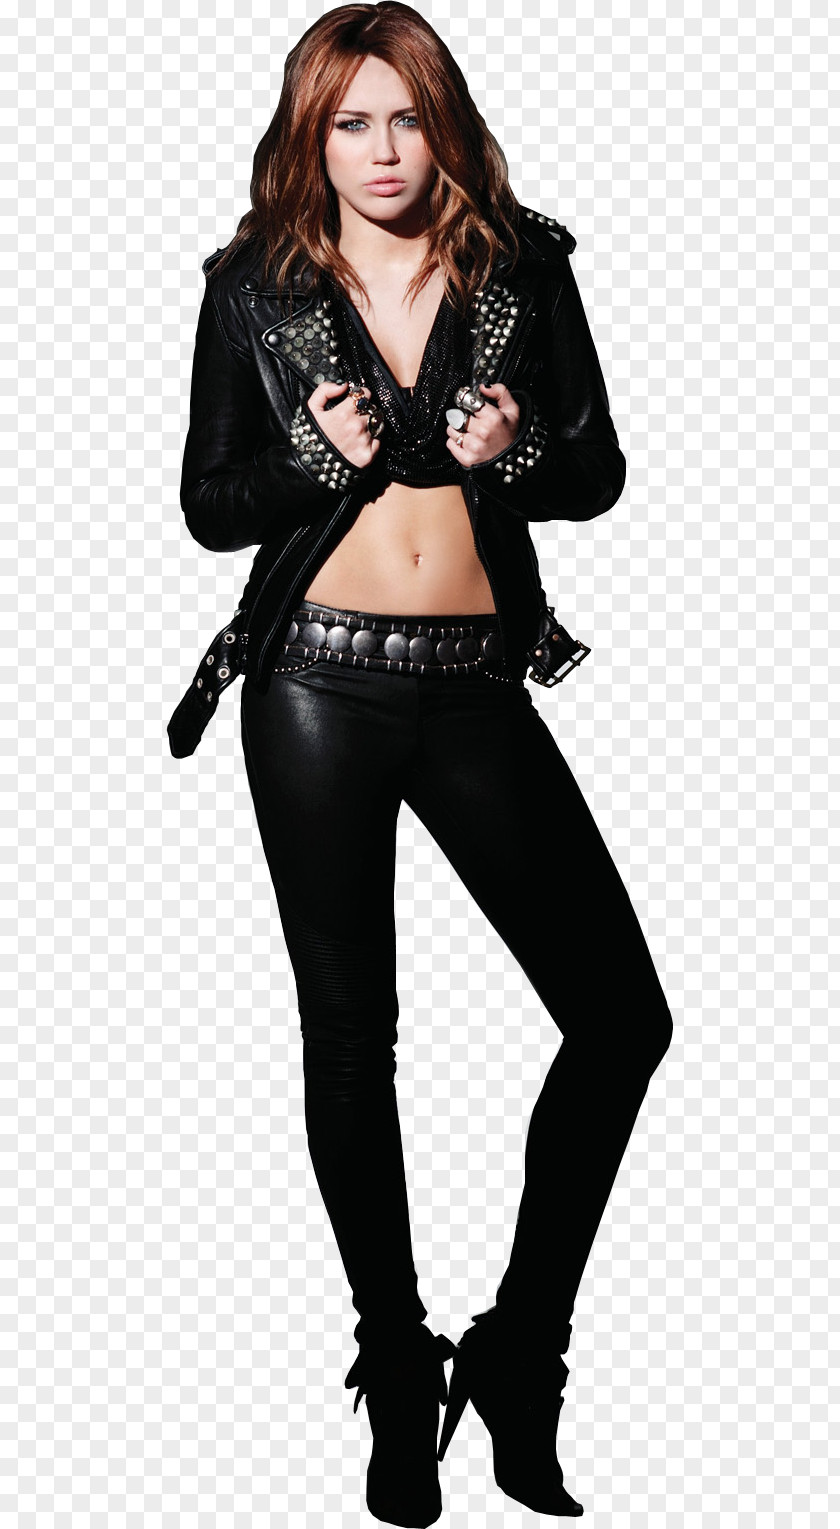 Miley Cyrus Can't Be Tamed Musician Photo Shoot Album PNG